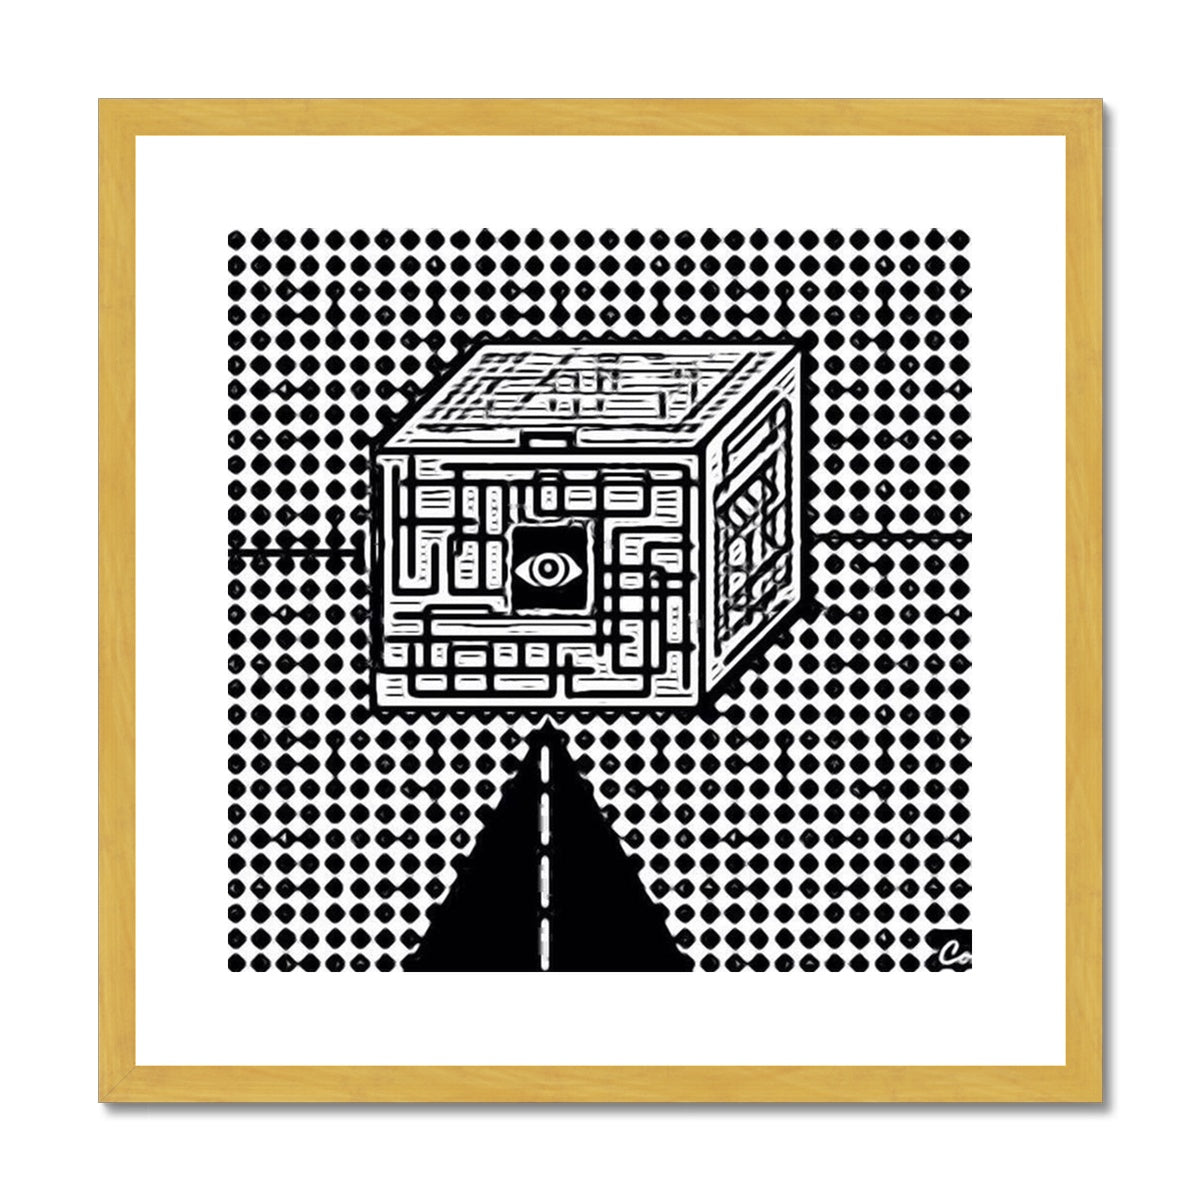 The Cube Antique Framed & Mounted Print